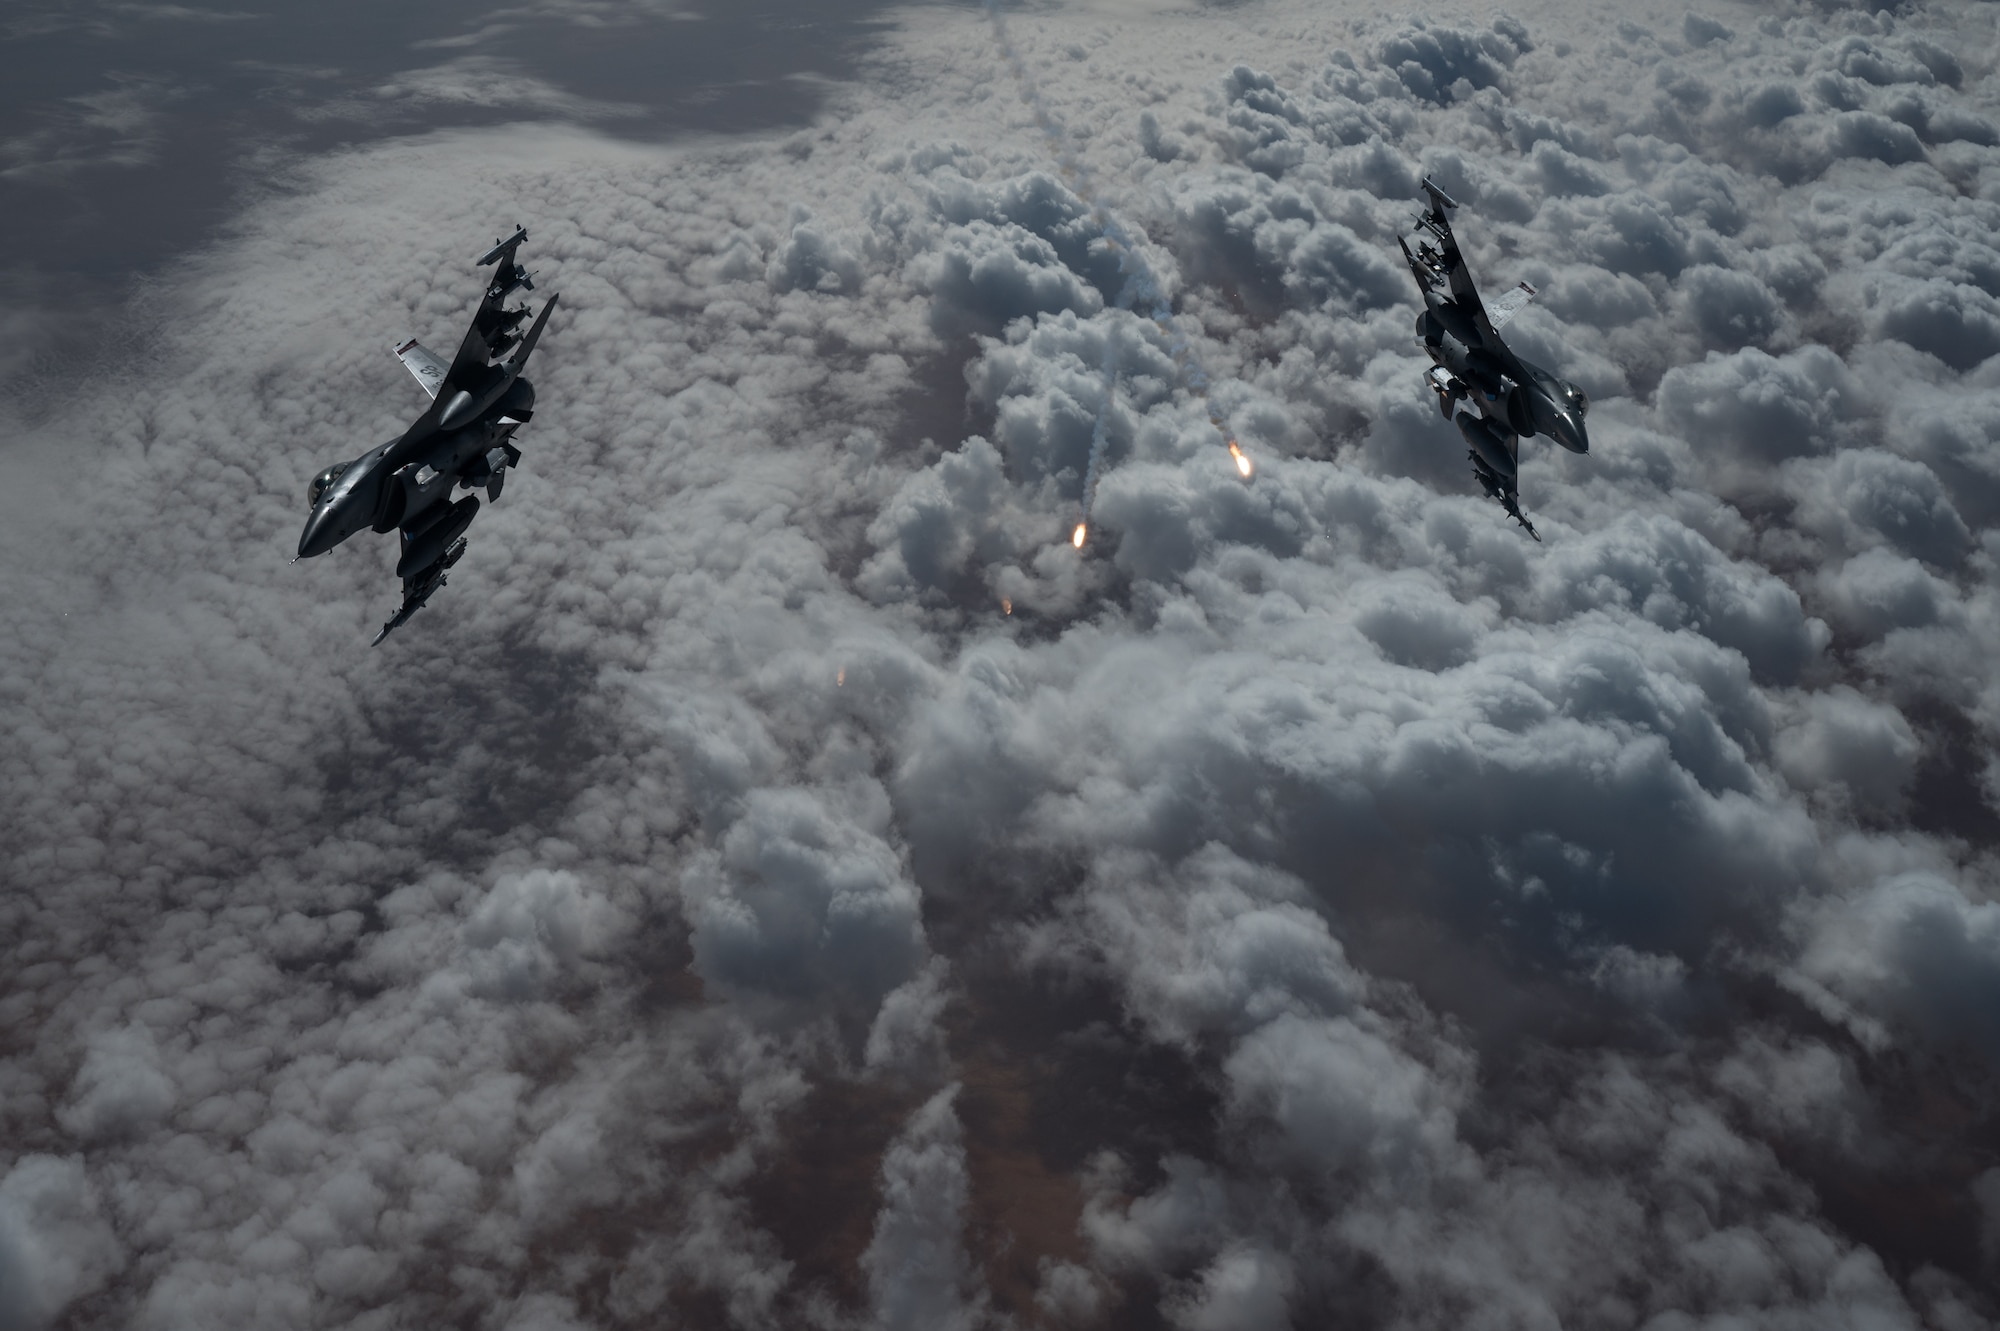 U.S. Air Force F-16 Fighting Falcons fly in the U.S. Central Command area of responsibility. (U.S. Air Force photo by Staff Sgt. Sean Carnes)